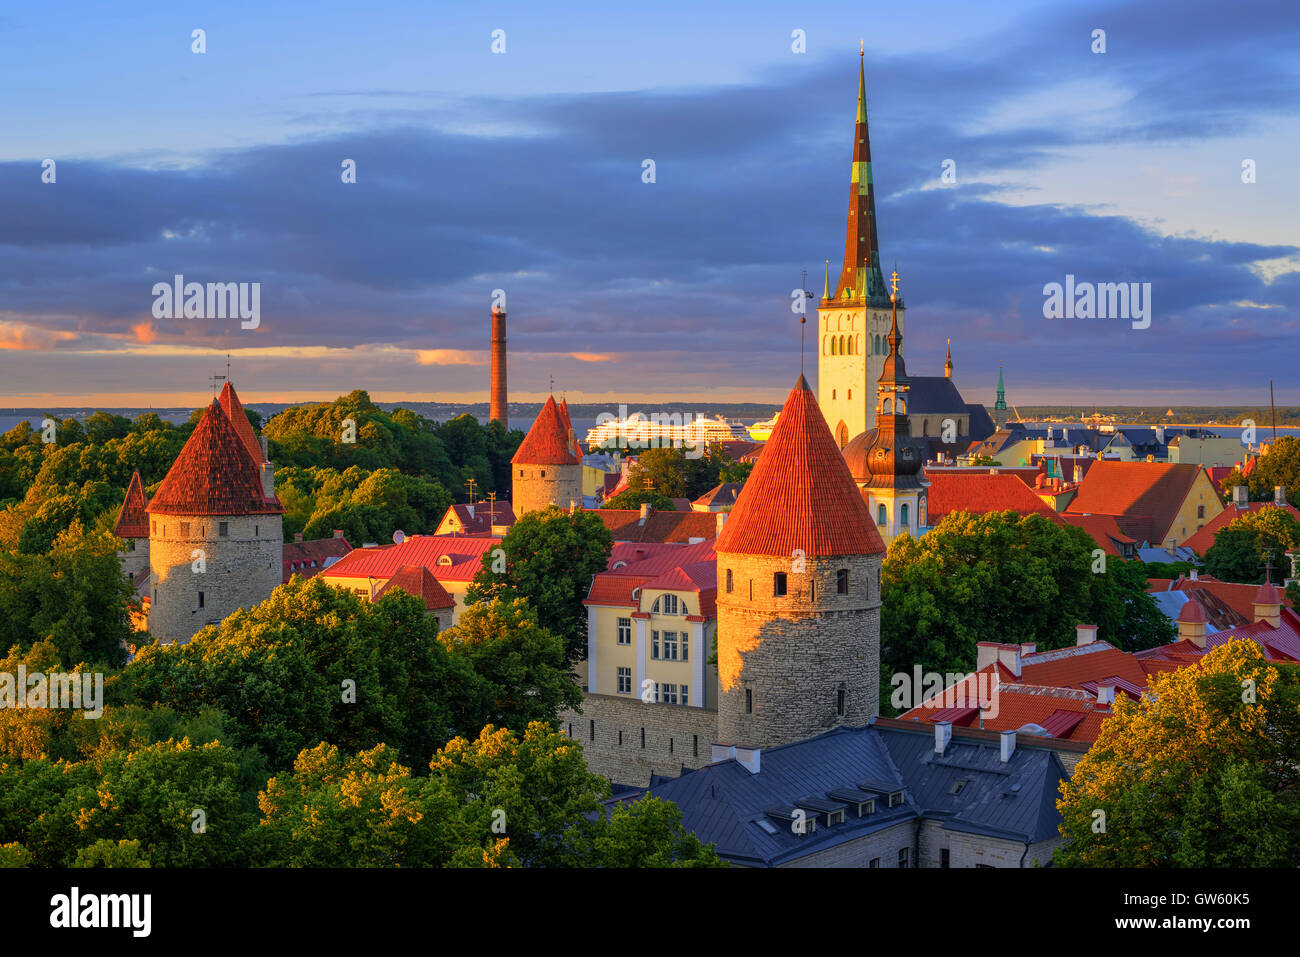 St. Olaf's Church and medieval watch towers in the old town of Tallinn, Estonia, on sunset Stock Photo